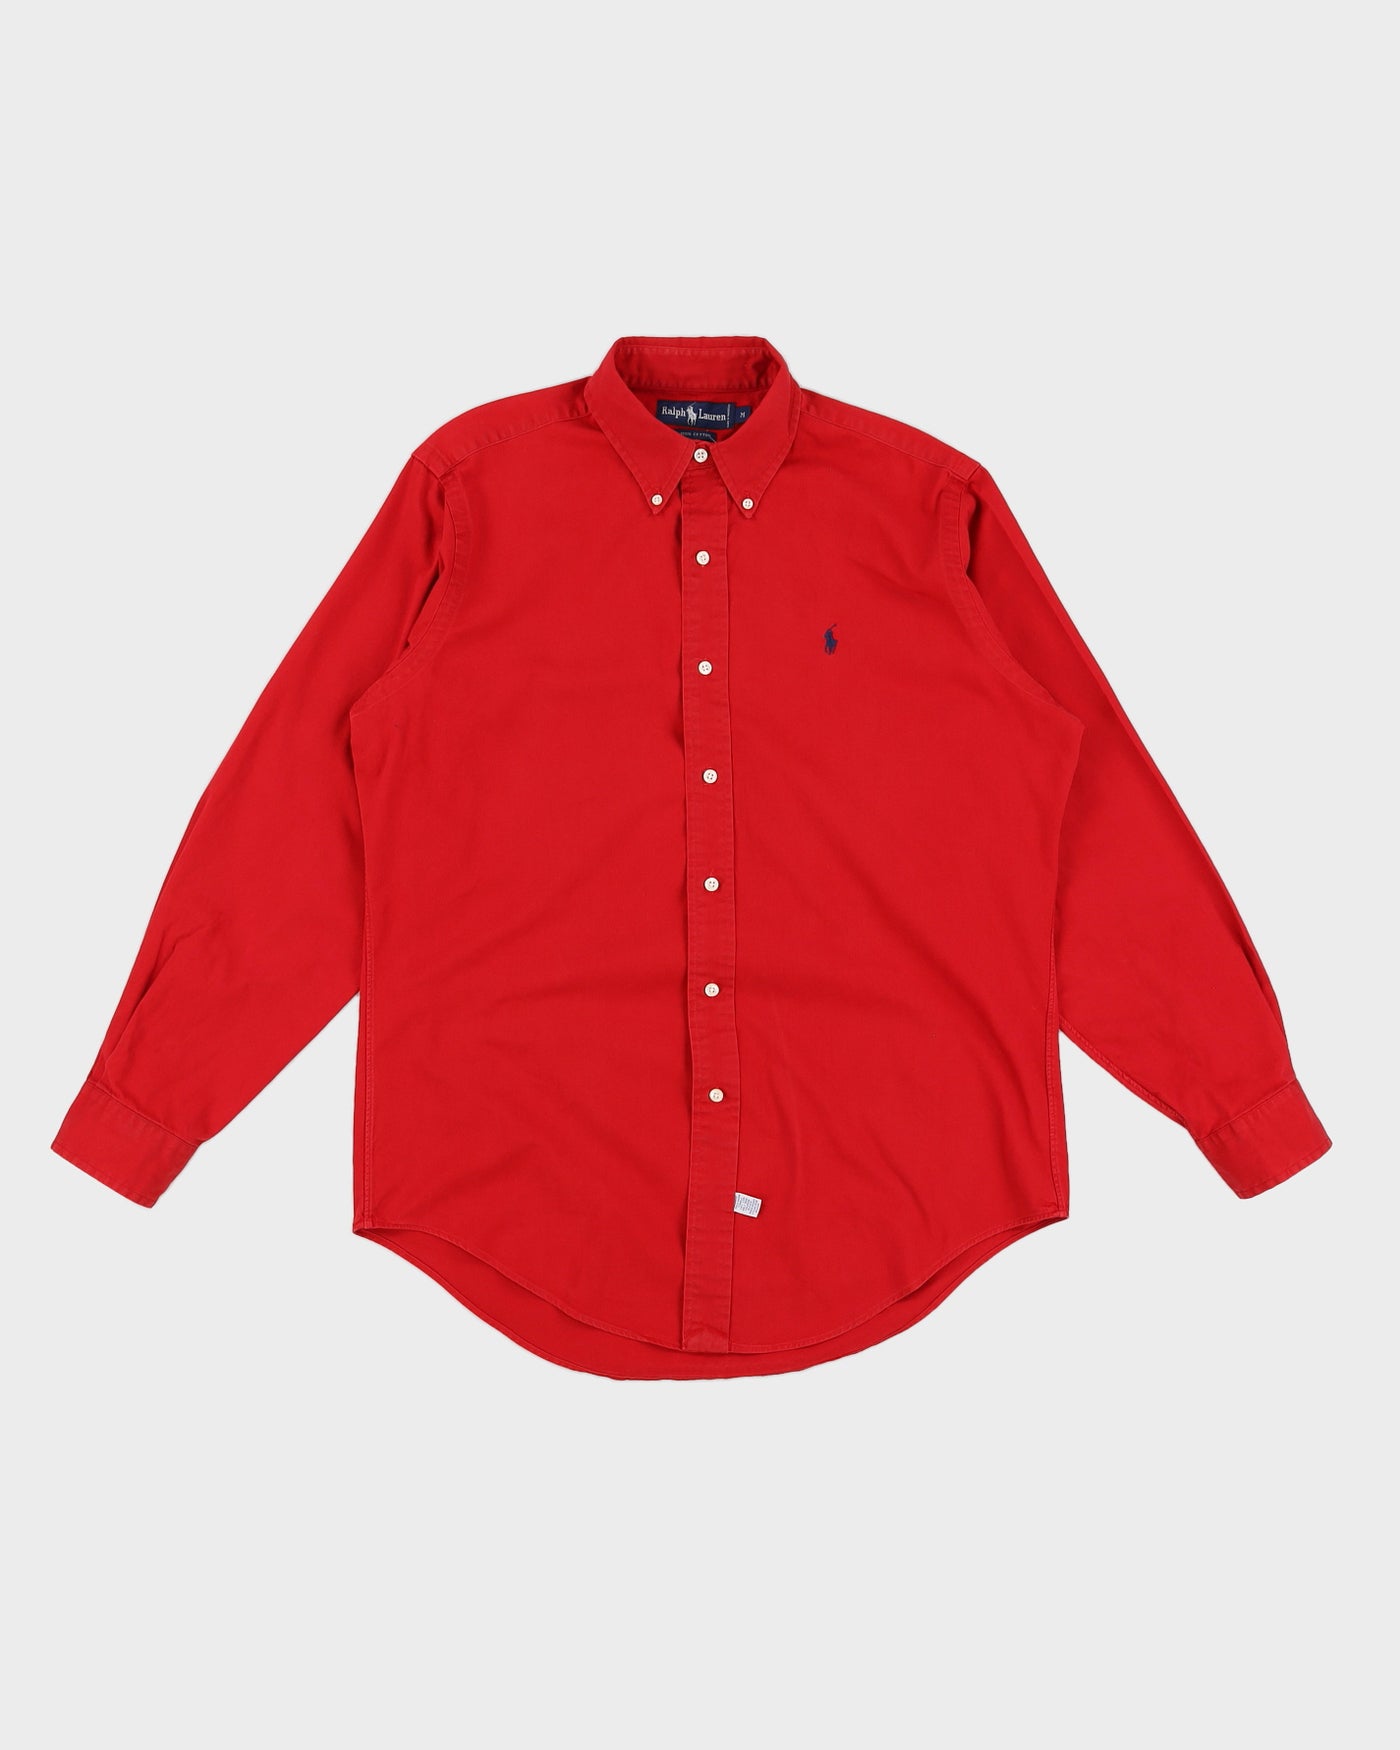 Vintage 90s Polo By Ralph Lauren Red Shirt With Navy Logo - L